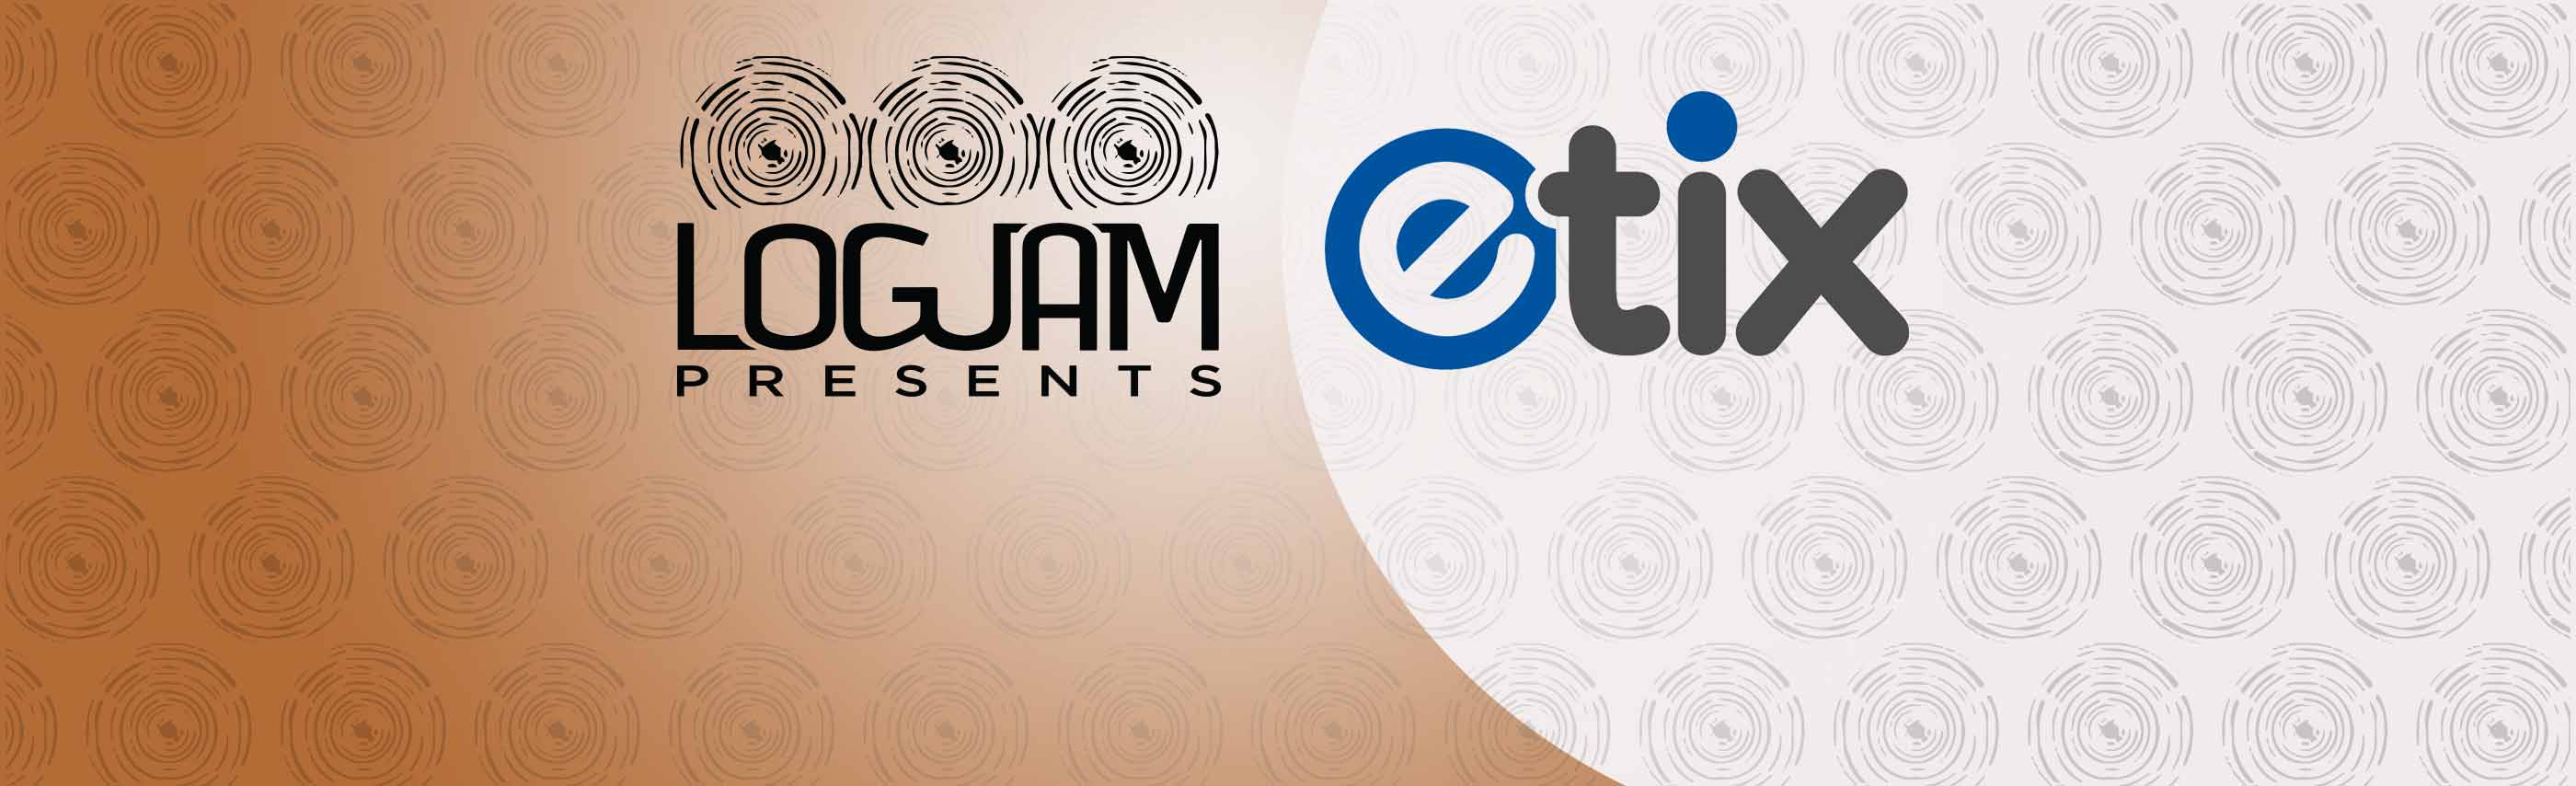 As of February 6, 2019, Logjam Presents will now be using Etix as its official ticketing platform.